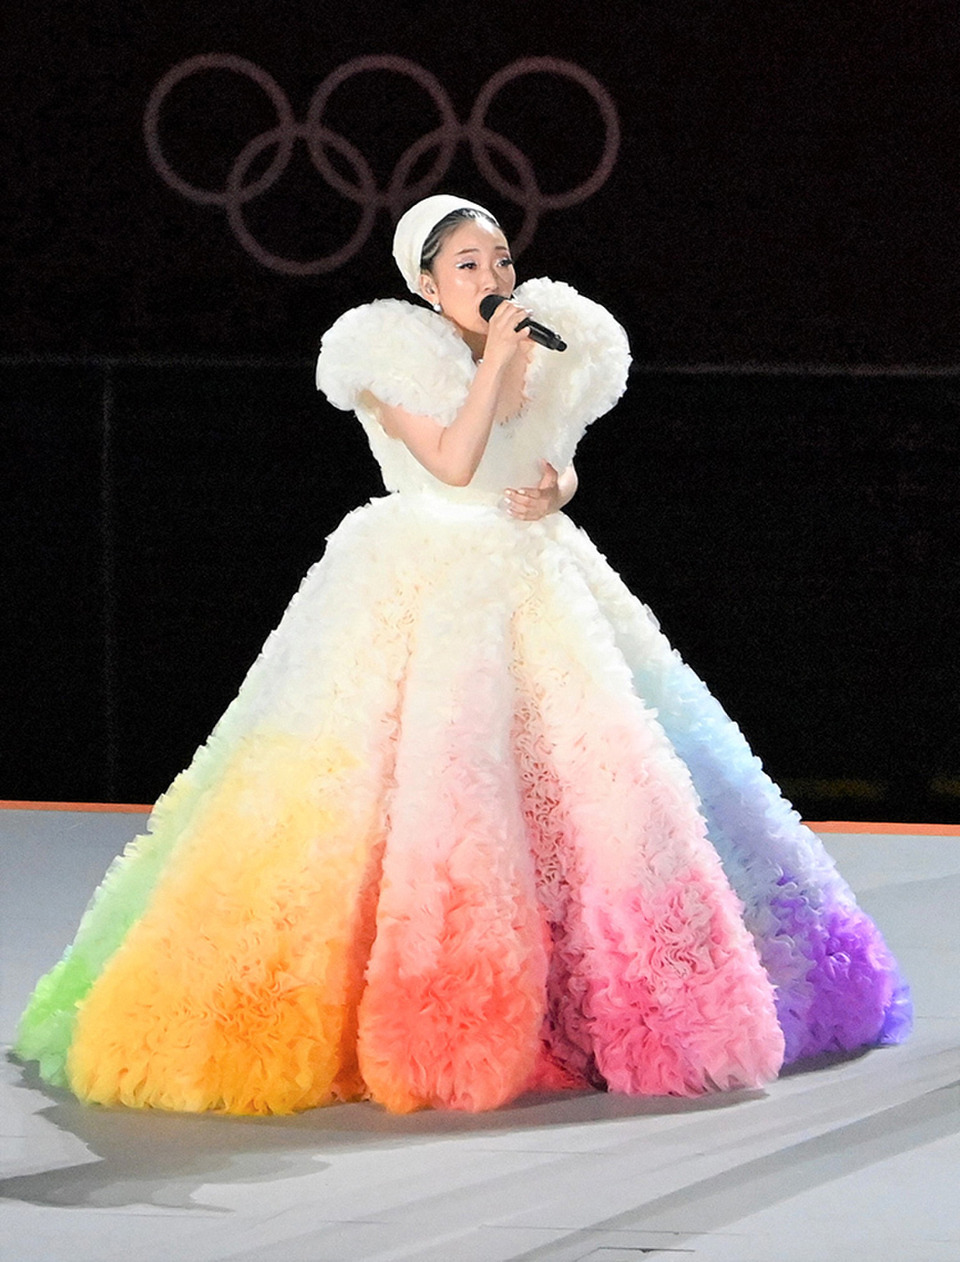 MISIA sang the national anthem of Japan at the Opening Ceremony for the Olympic Games Tokyo 2020, which were held in 2021. She pursues her career in music based on the saying she learned in Africa, “where there is music, there is no fighting.” THE MAINICHI NEWSPAPERS/AFLO